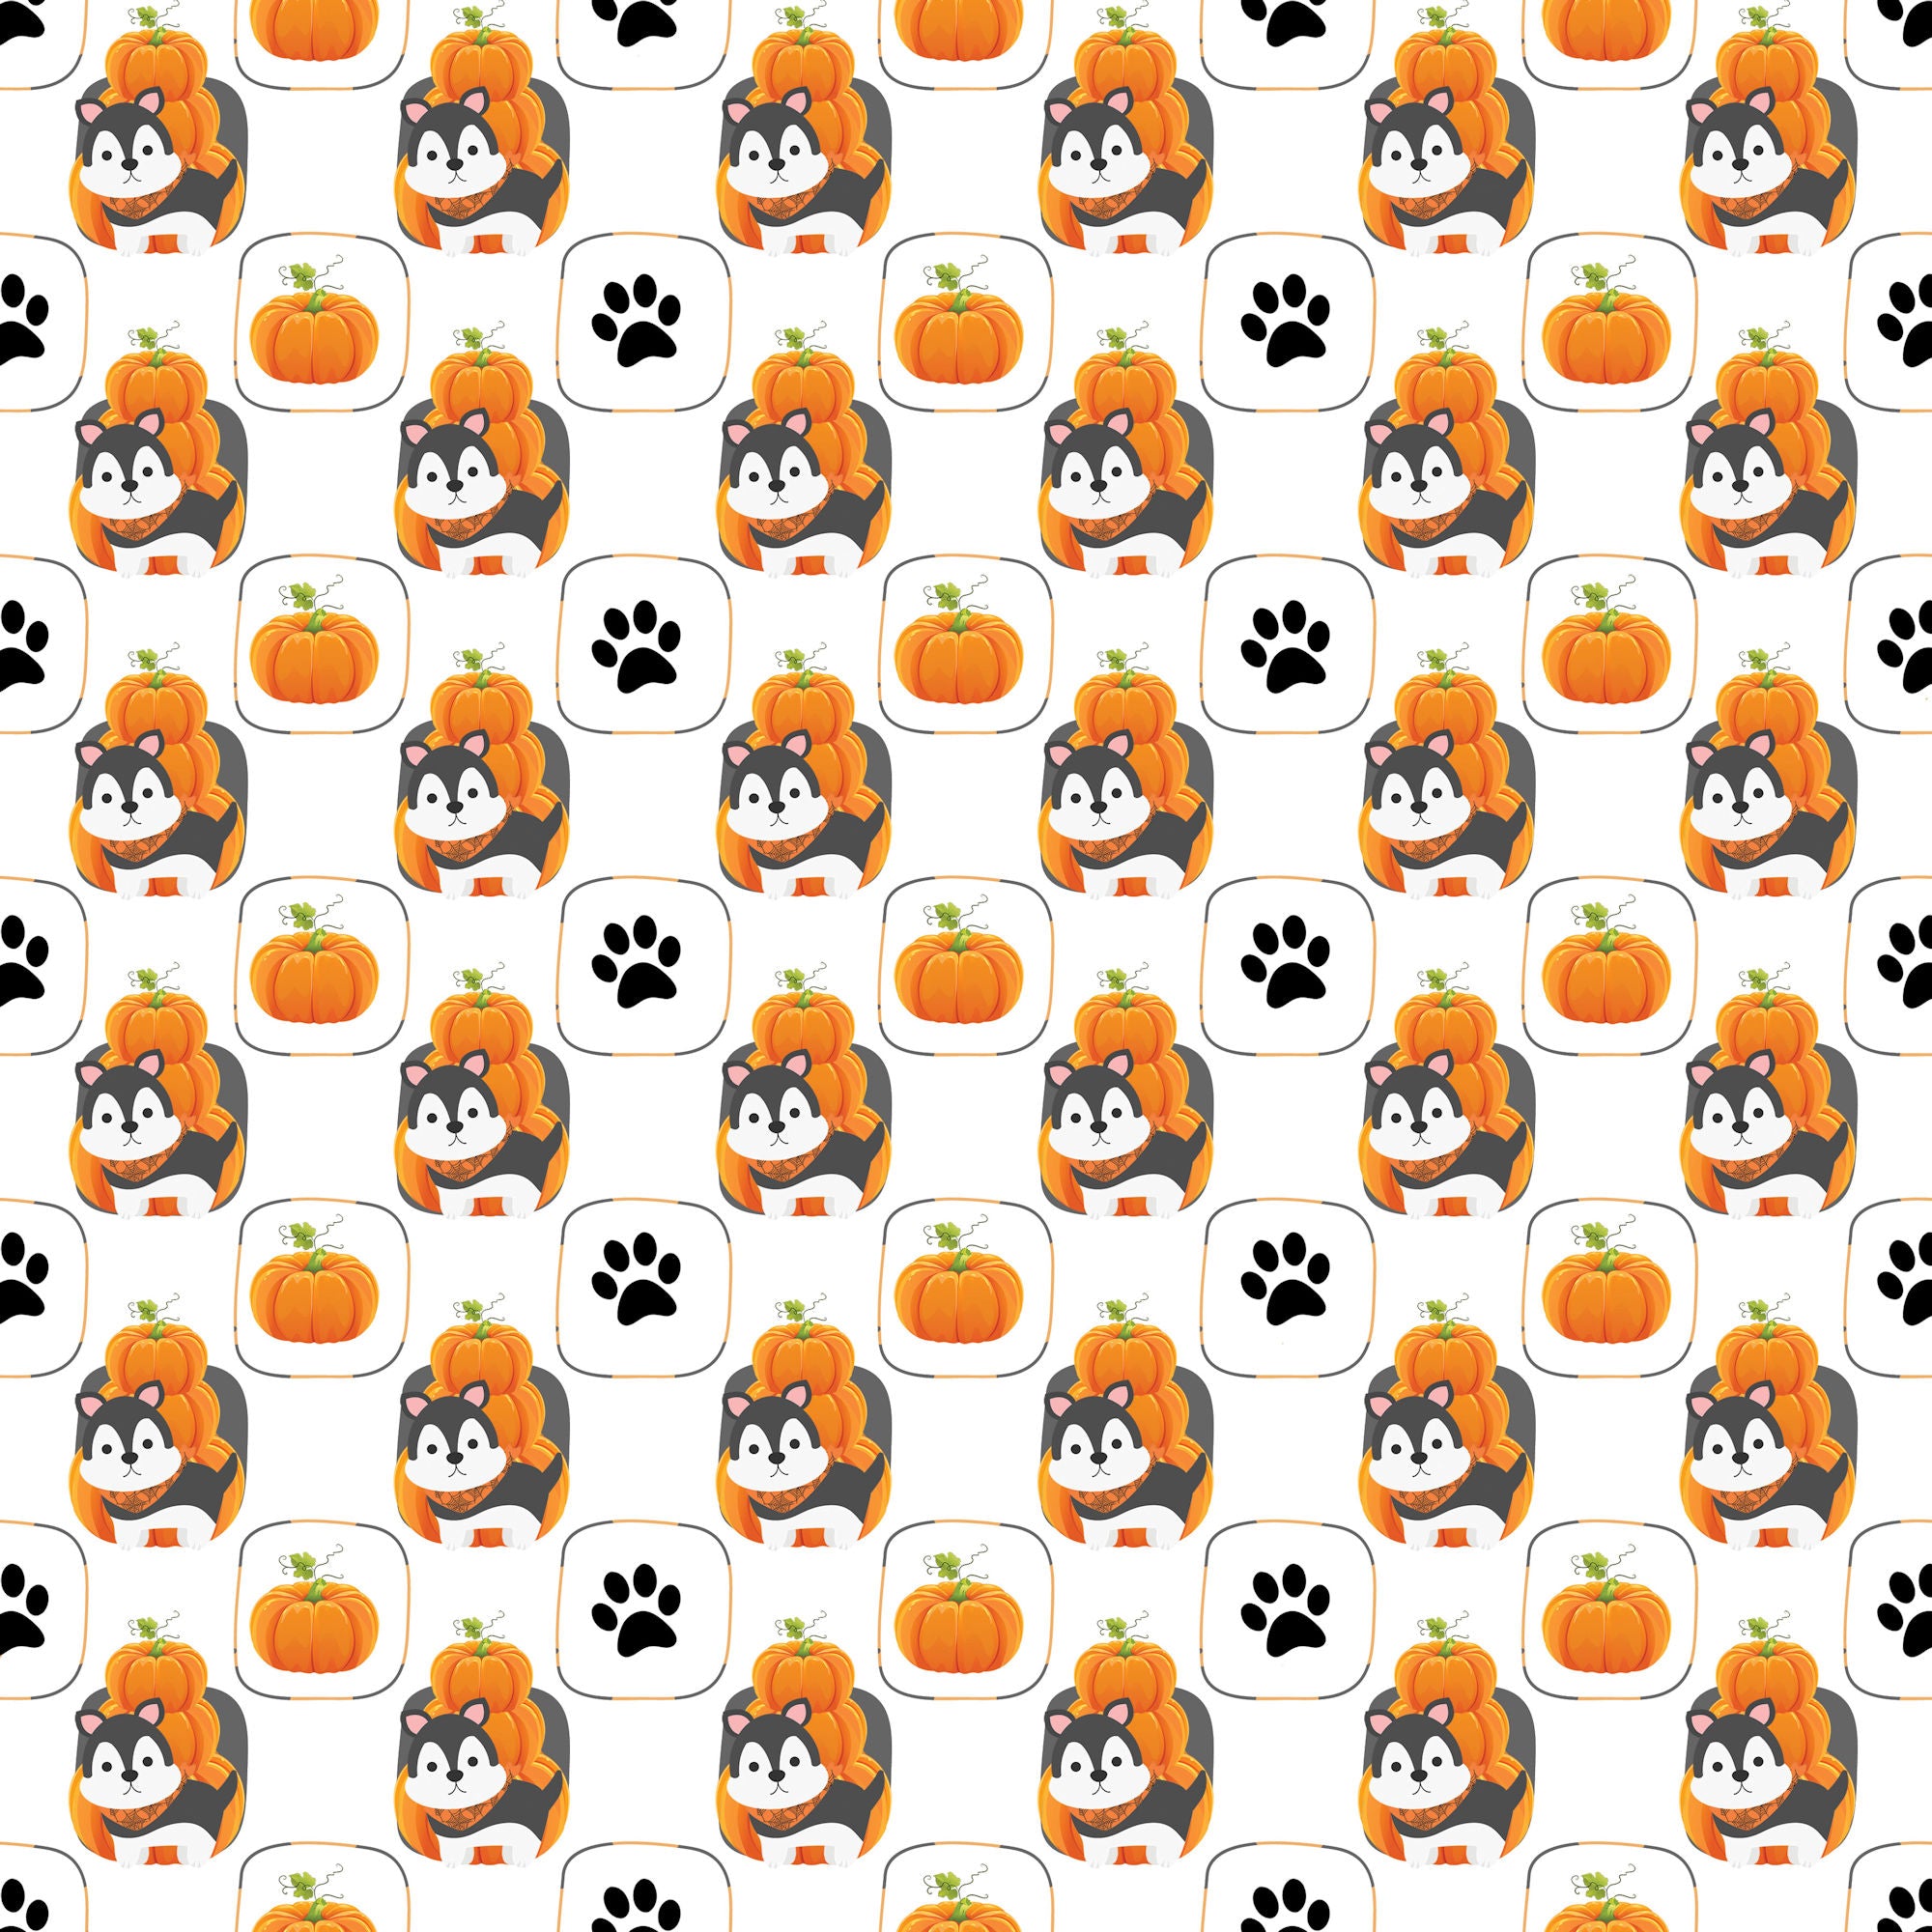 Happy Bow-Wow-Ween Collection Pumpkin Puppy Poses 12 x 12 Double-Sided Scrapbook Paper by SSC Designs